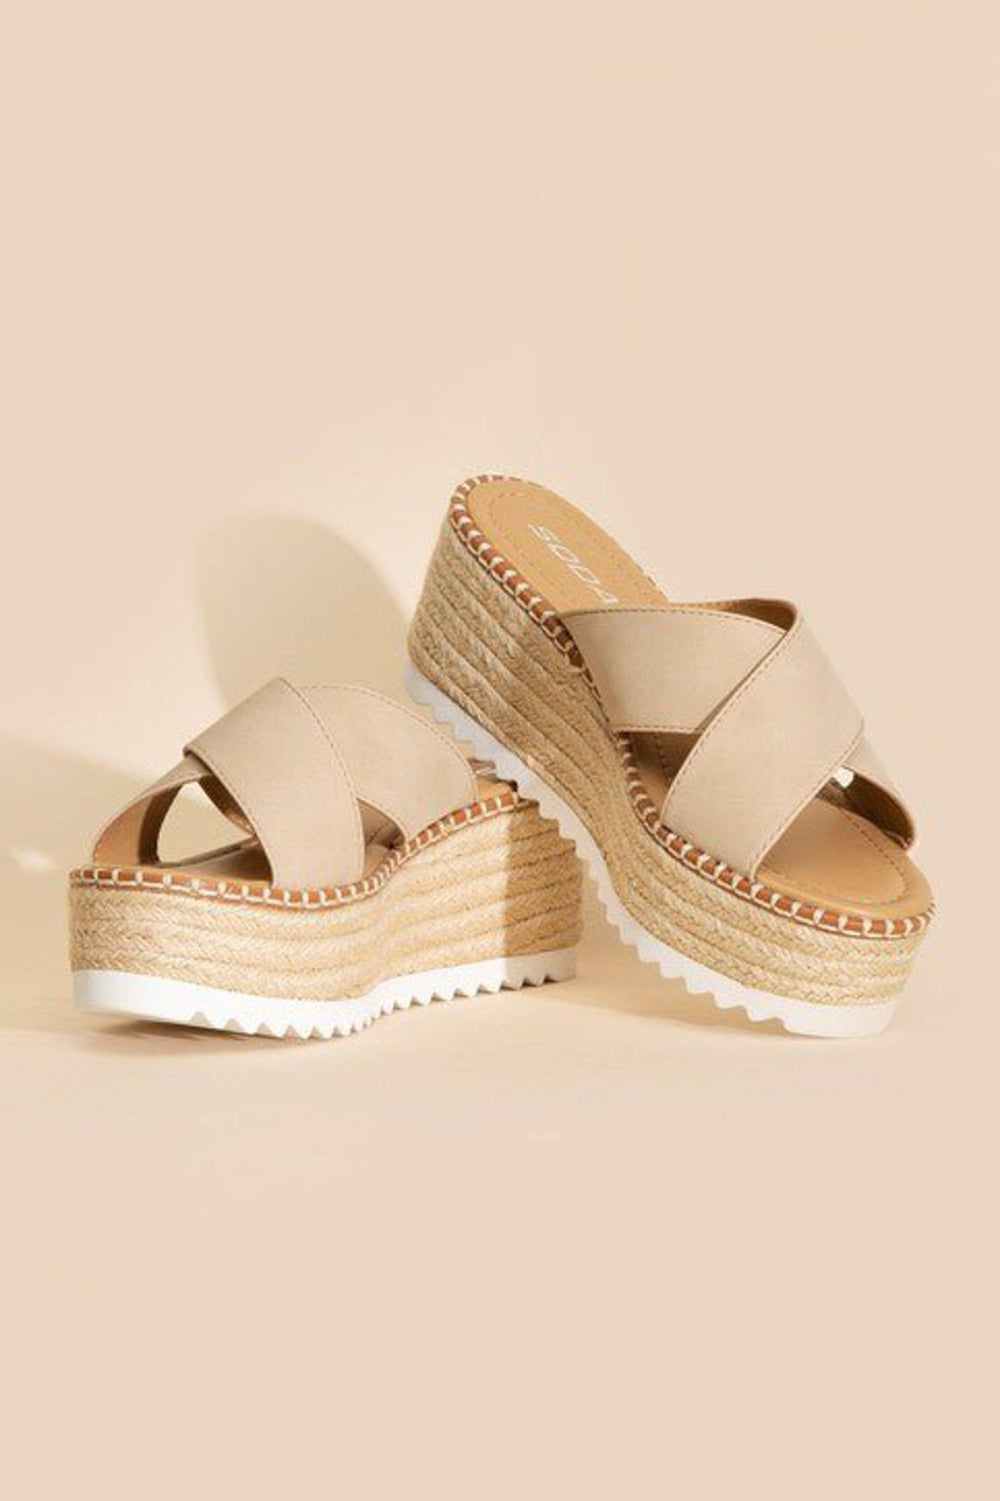 Petal and Pup USA SHOES Heights Platform - Blond